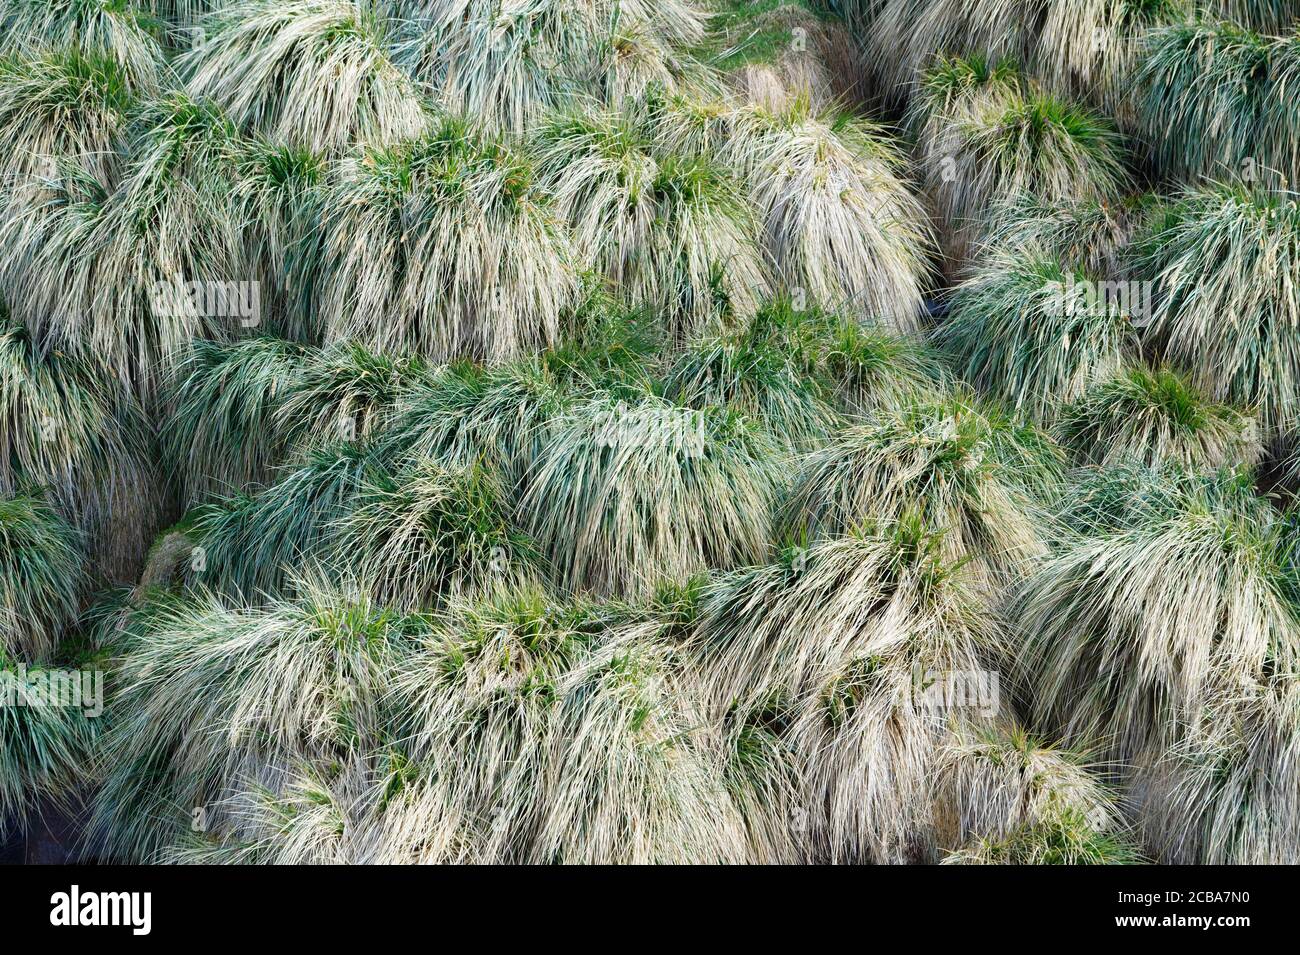 Tussock Grass, Stromness Bay, South Georgia, South Georgia and the Sandwich Islands, Antarctica Stock Photo